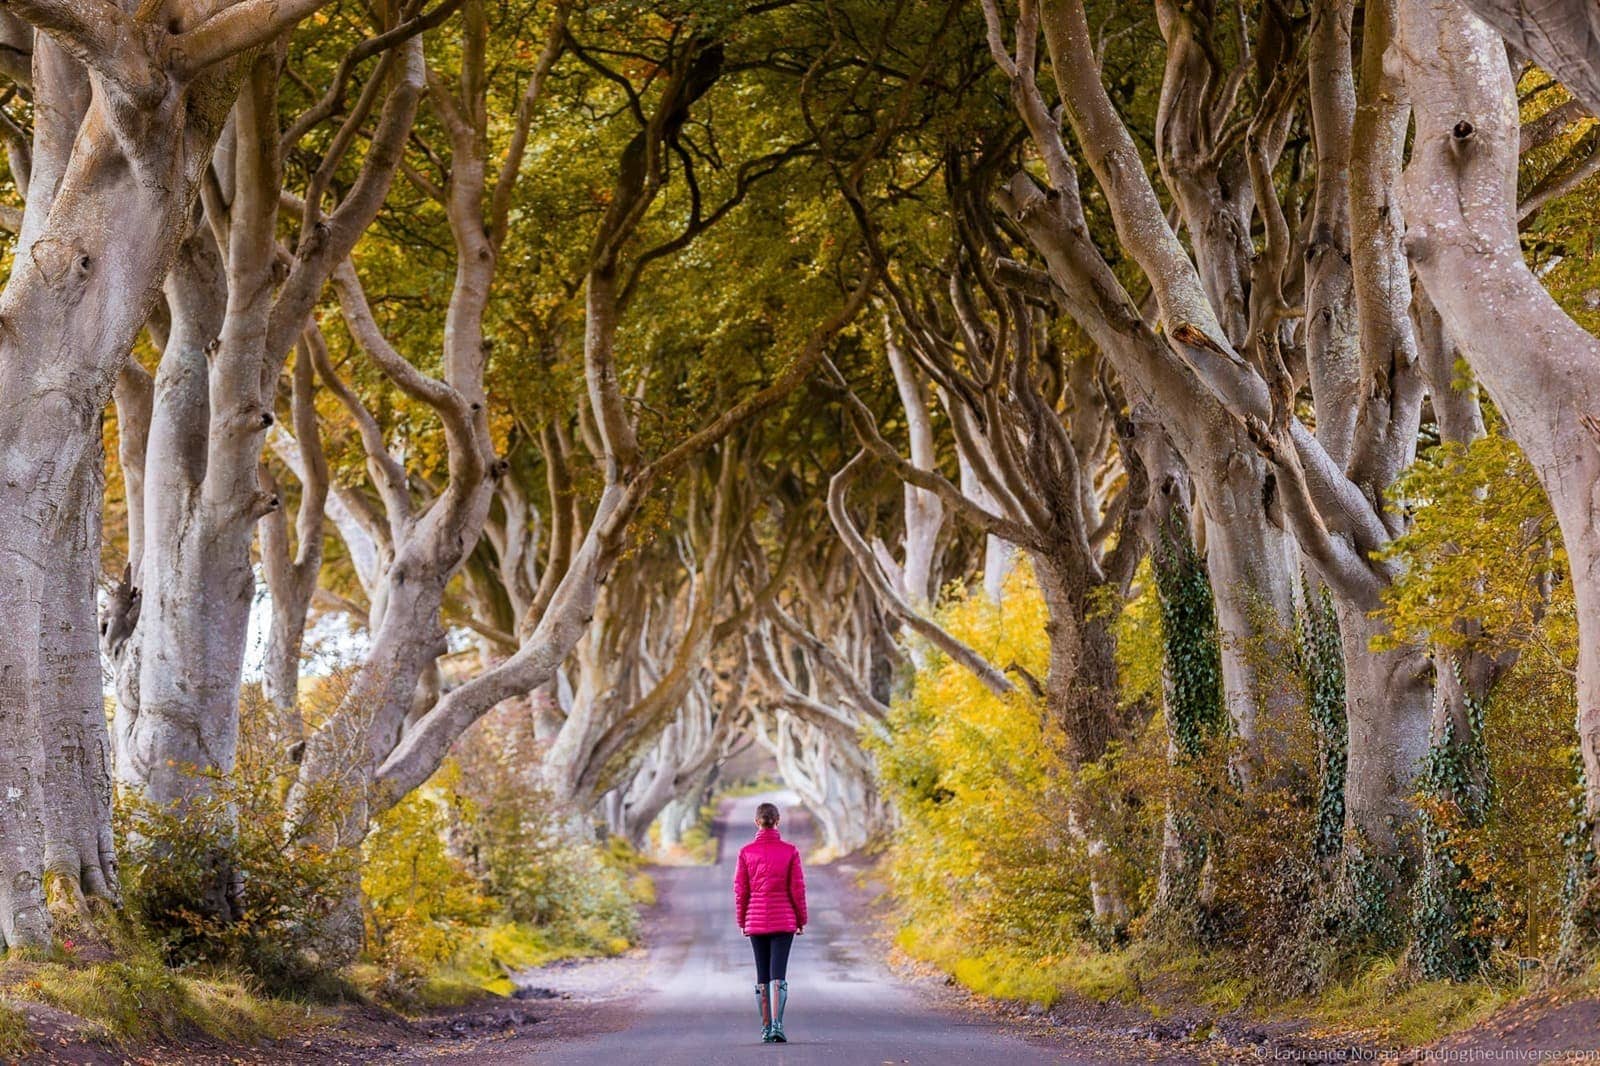 A Guide to the Game of Thrones Filming Locations in Northern Ireland